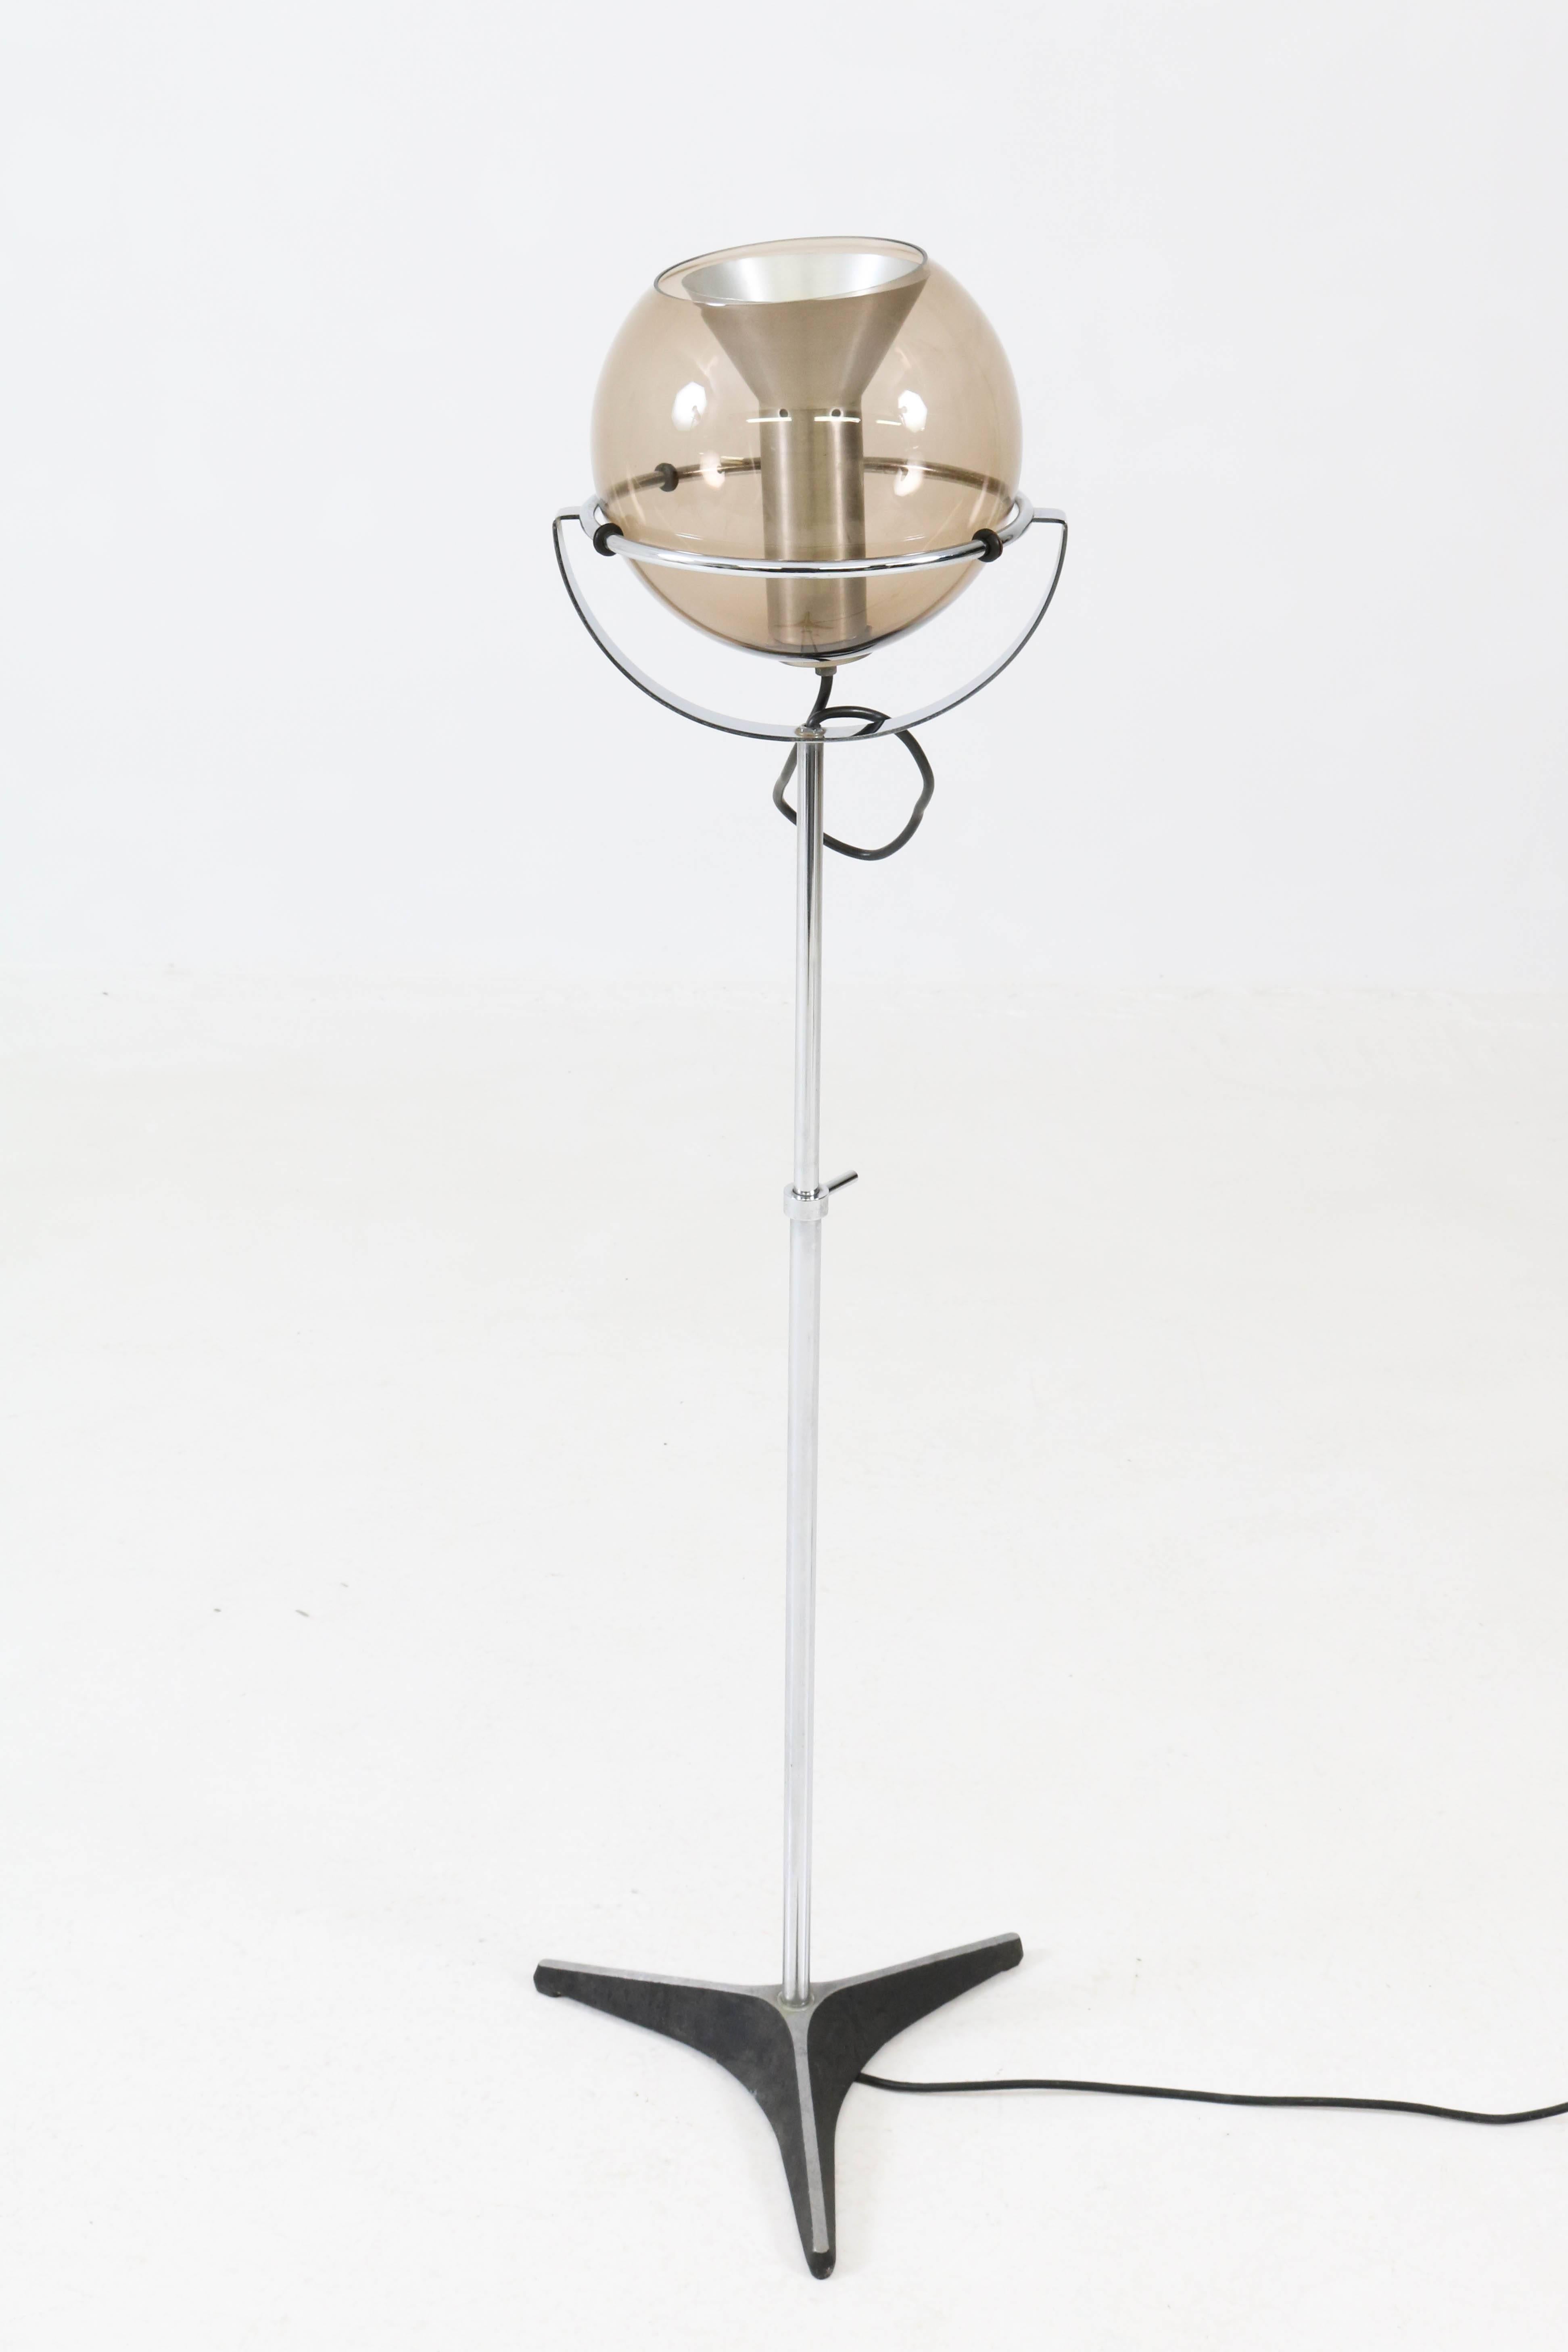 Mid-Century Modern Globe 2000 floor lamp by Frank Ligtelijn for RAAK Amsterdam, 1960s.
Adjustable in height.
The lamp globe can be placed pointing in any direction.
In good original condition with minor wear consistent with age and use.